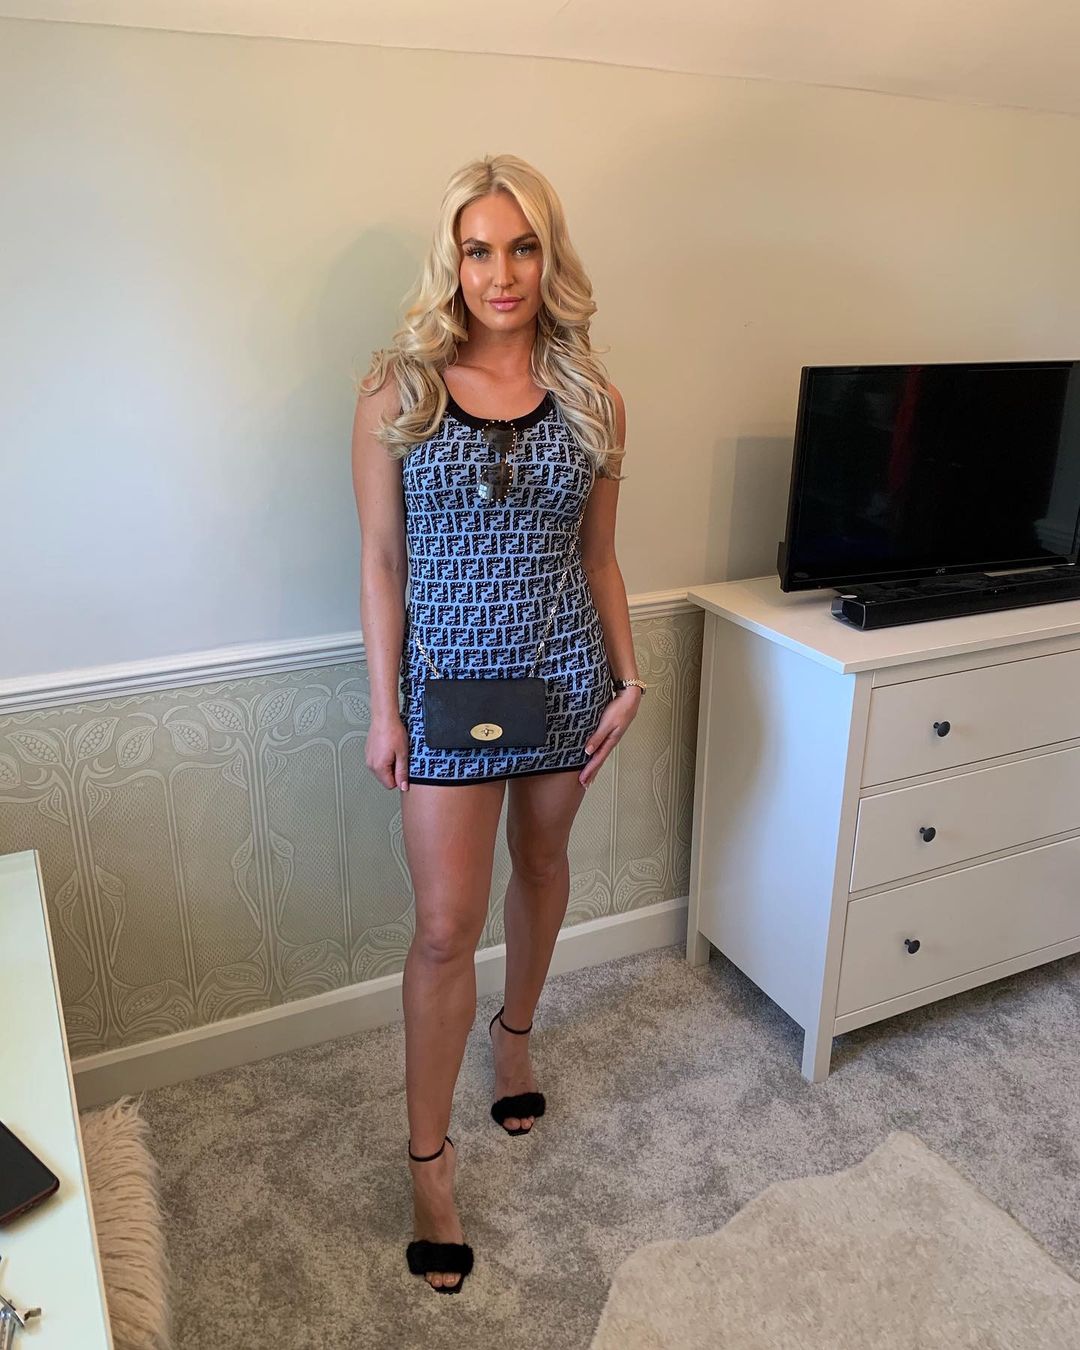 12/01/2021. Charley Hull Won Throwback Thursday in a Revealing Leopard Prin...